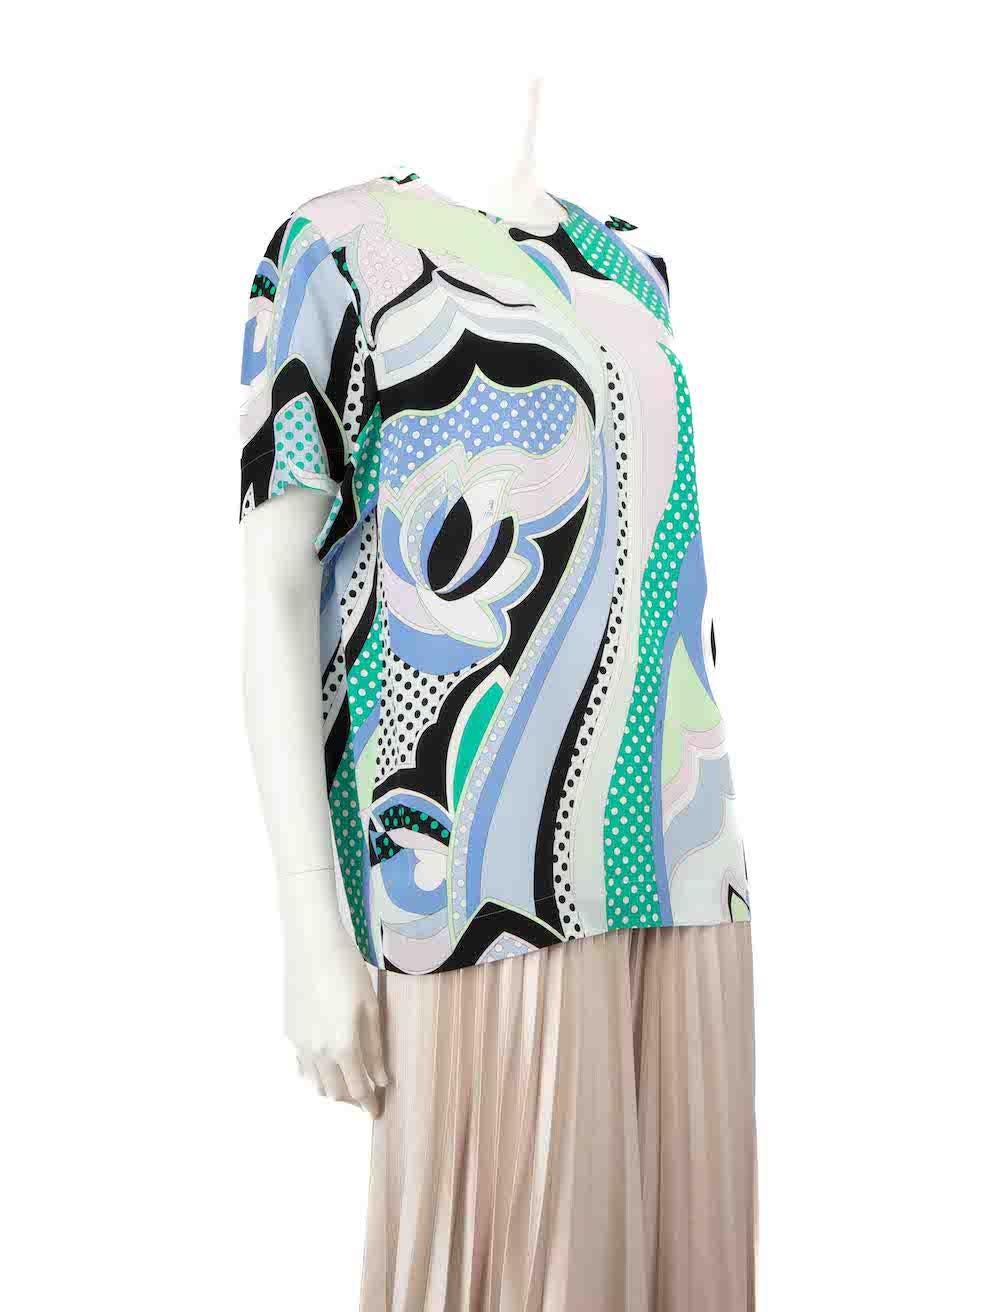 CONDITION is Very good. Hardly any visible wear to top is evident on this used Emilio Pucci designer resale item.
 
 
 
 Details
 
 
 Multicolour- blue tone
 
 Silk
 
 Top
 
 Abstract pattern
 
 Short sleeves
 
 Round neck
 
 Back button fastening
